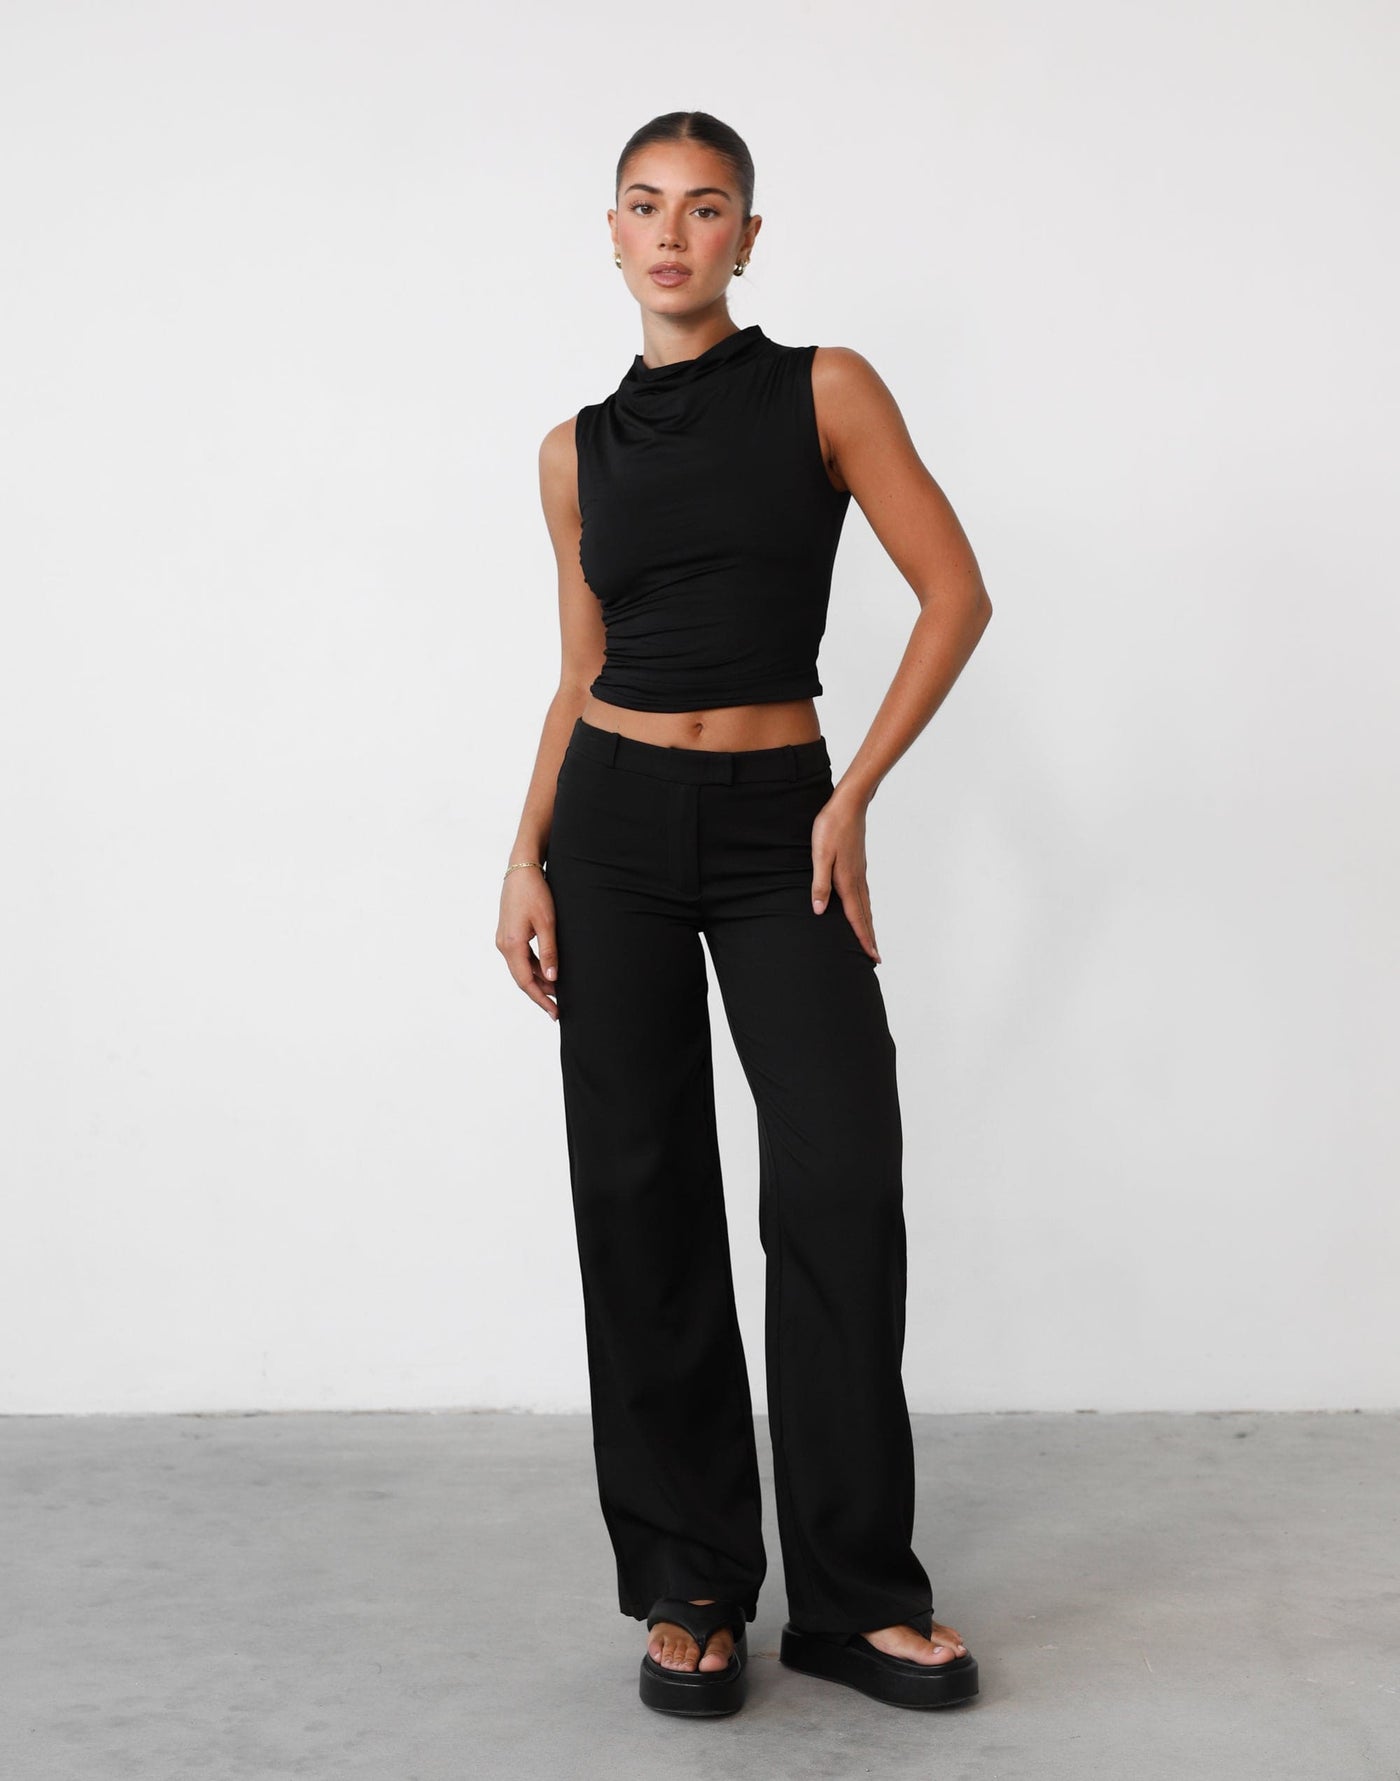 Madison Top (Black) - High Cowl Neck Bodycon Top - Women's Top - Charcoal Clothing